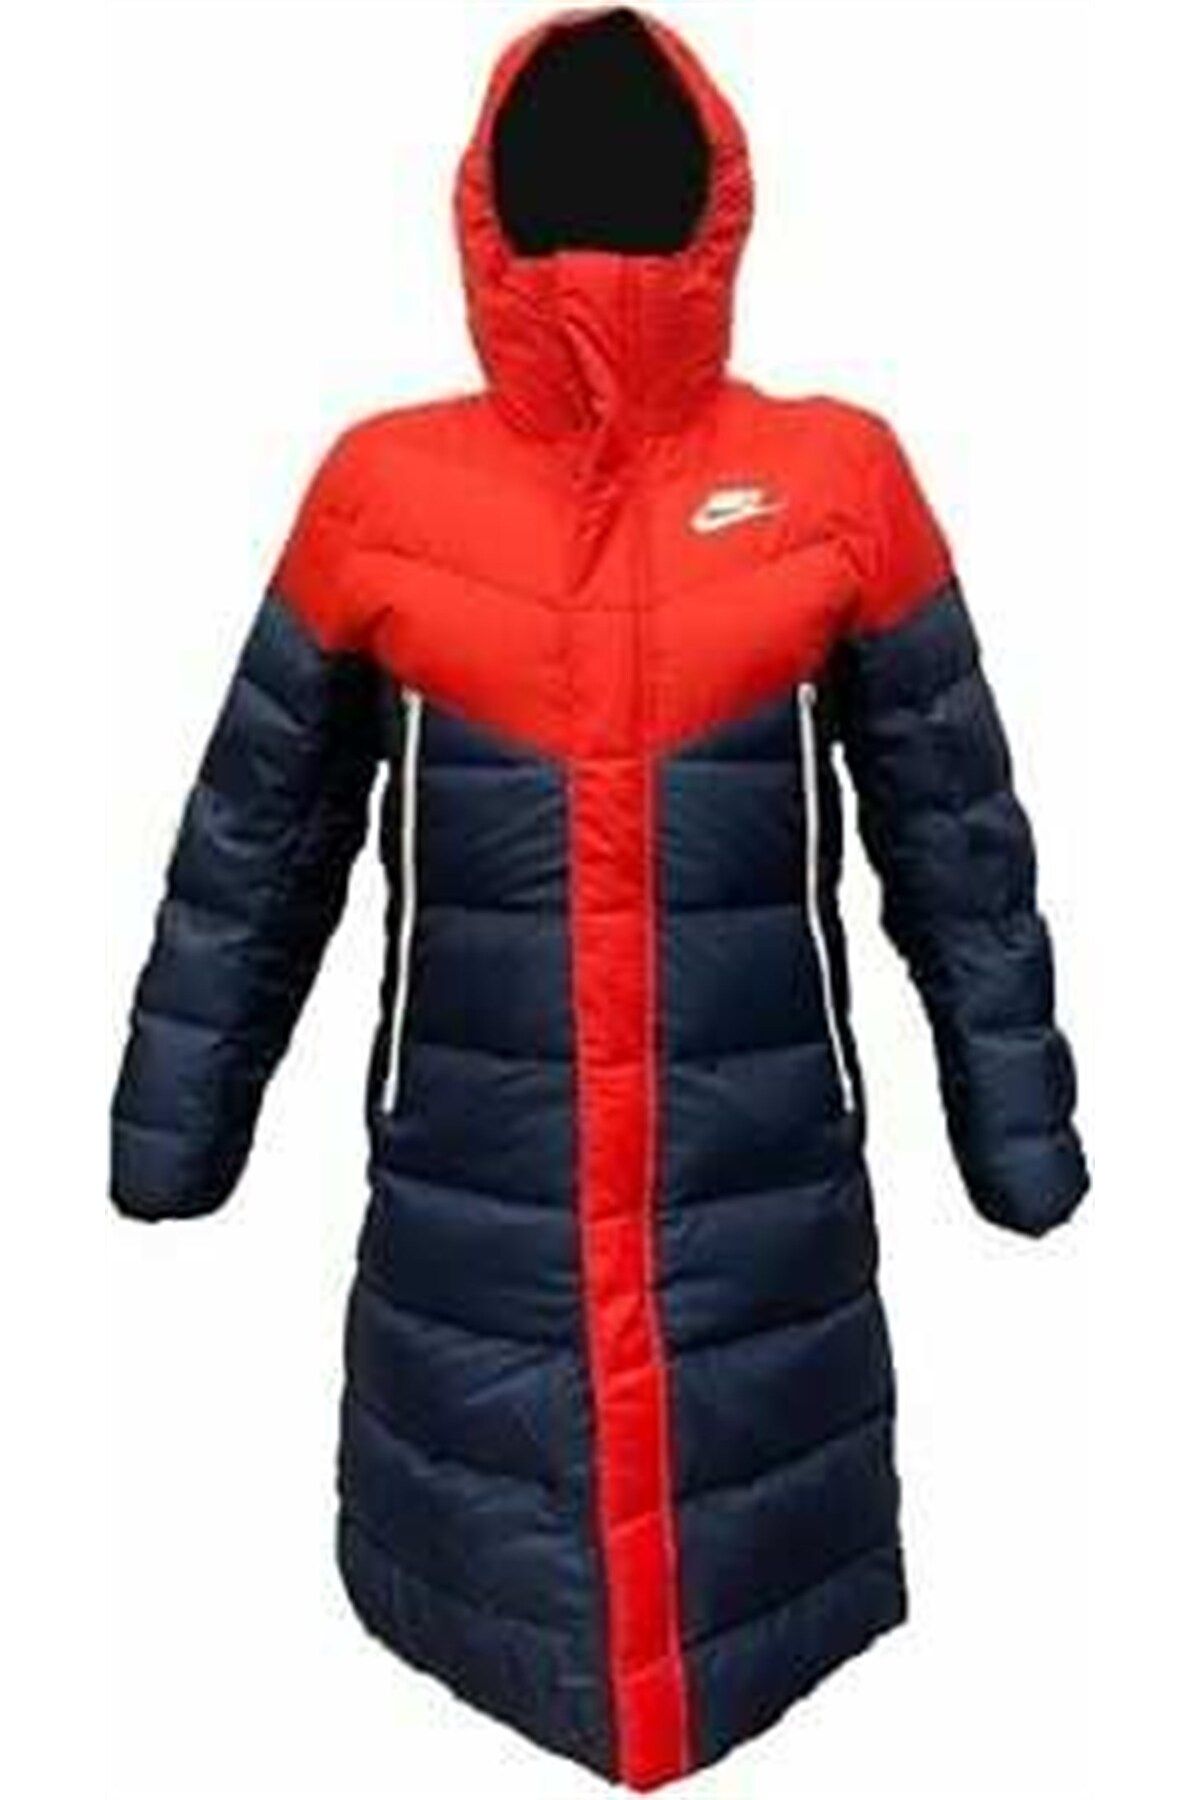 Nike Parka Long Red Blue Jacket Down Fill Insulated Cu0280-673